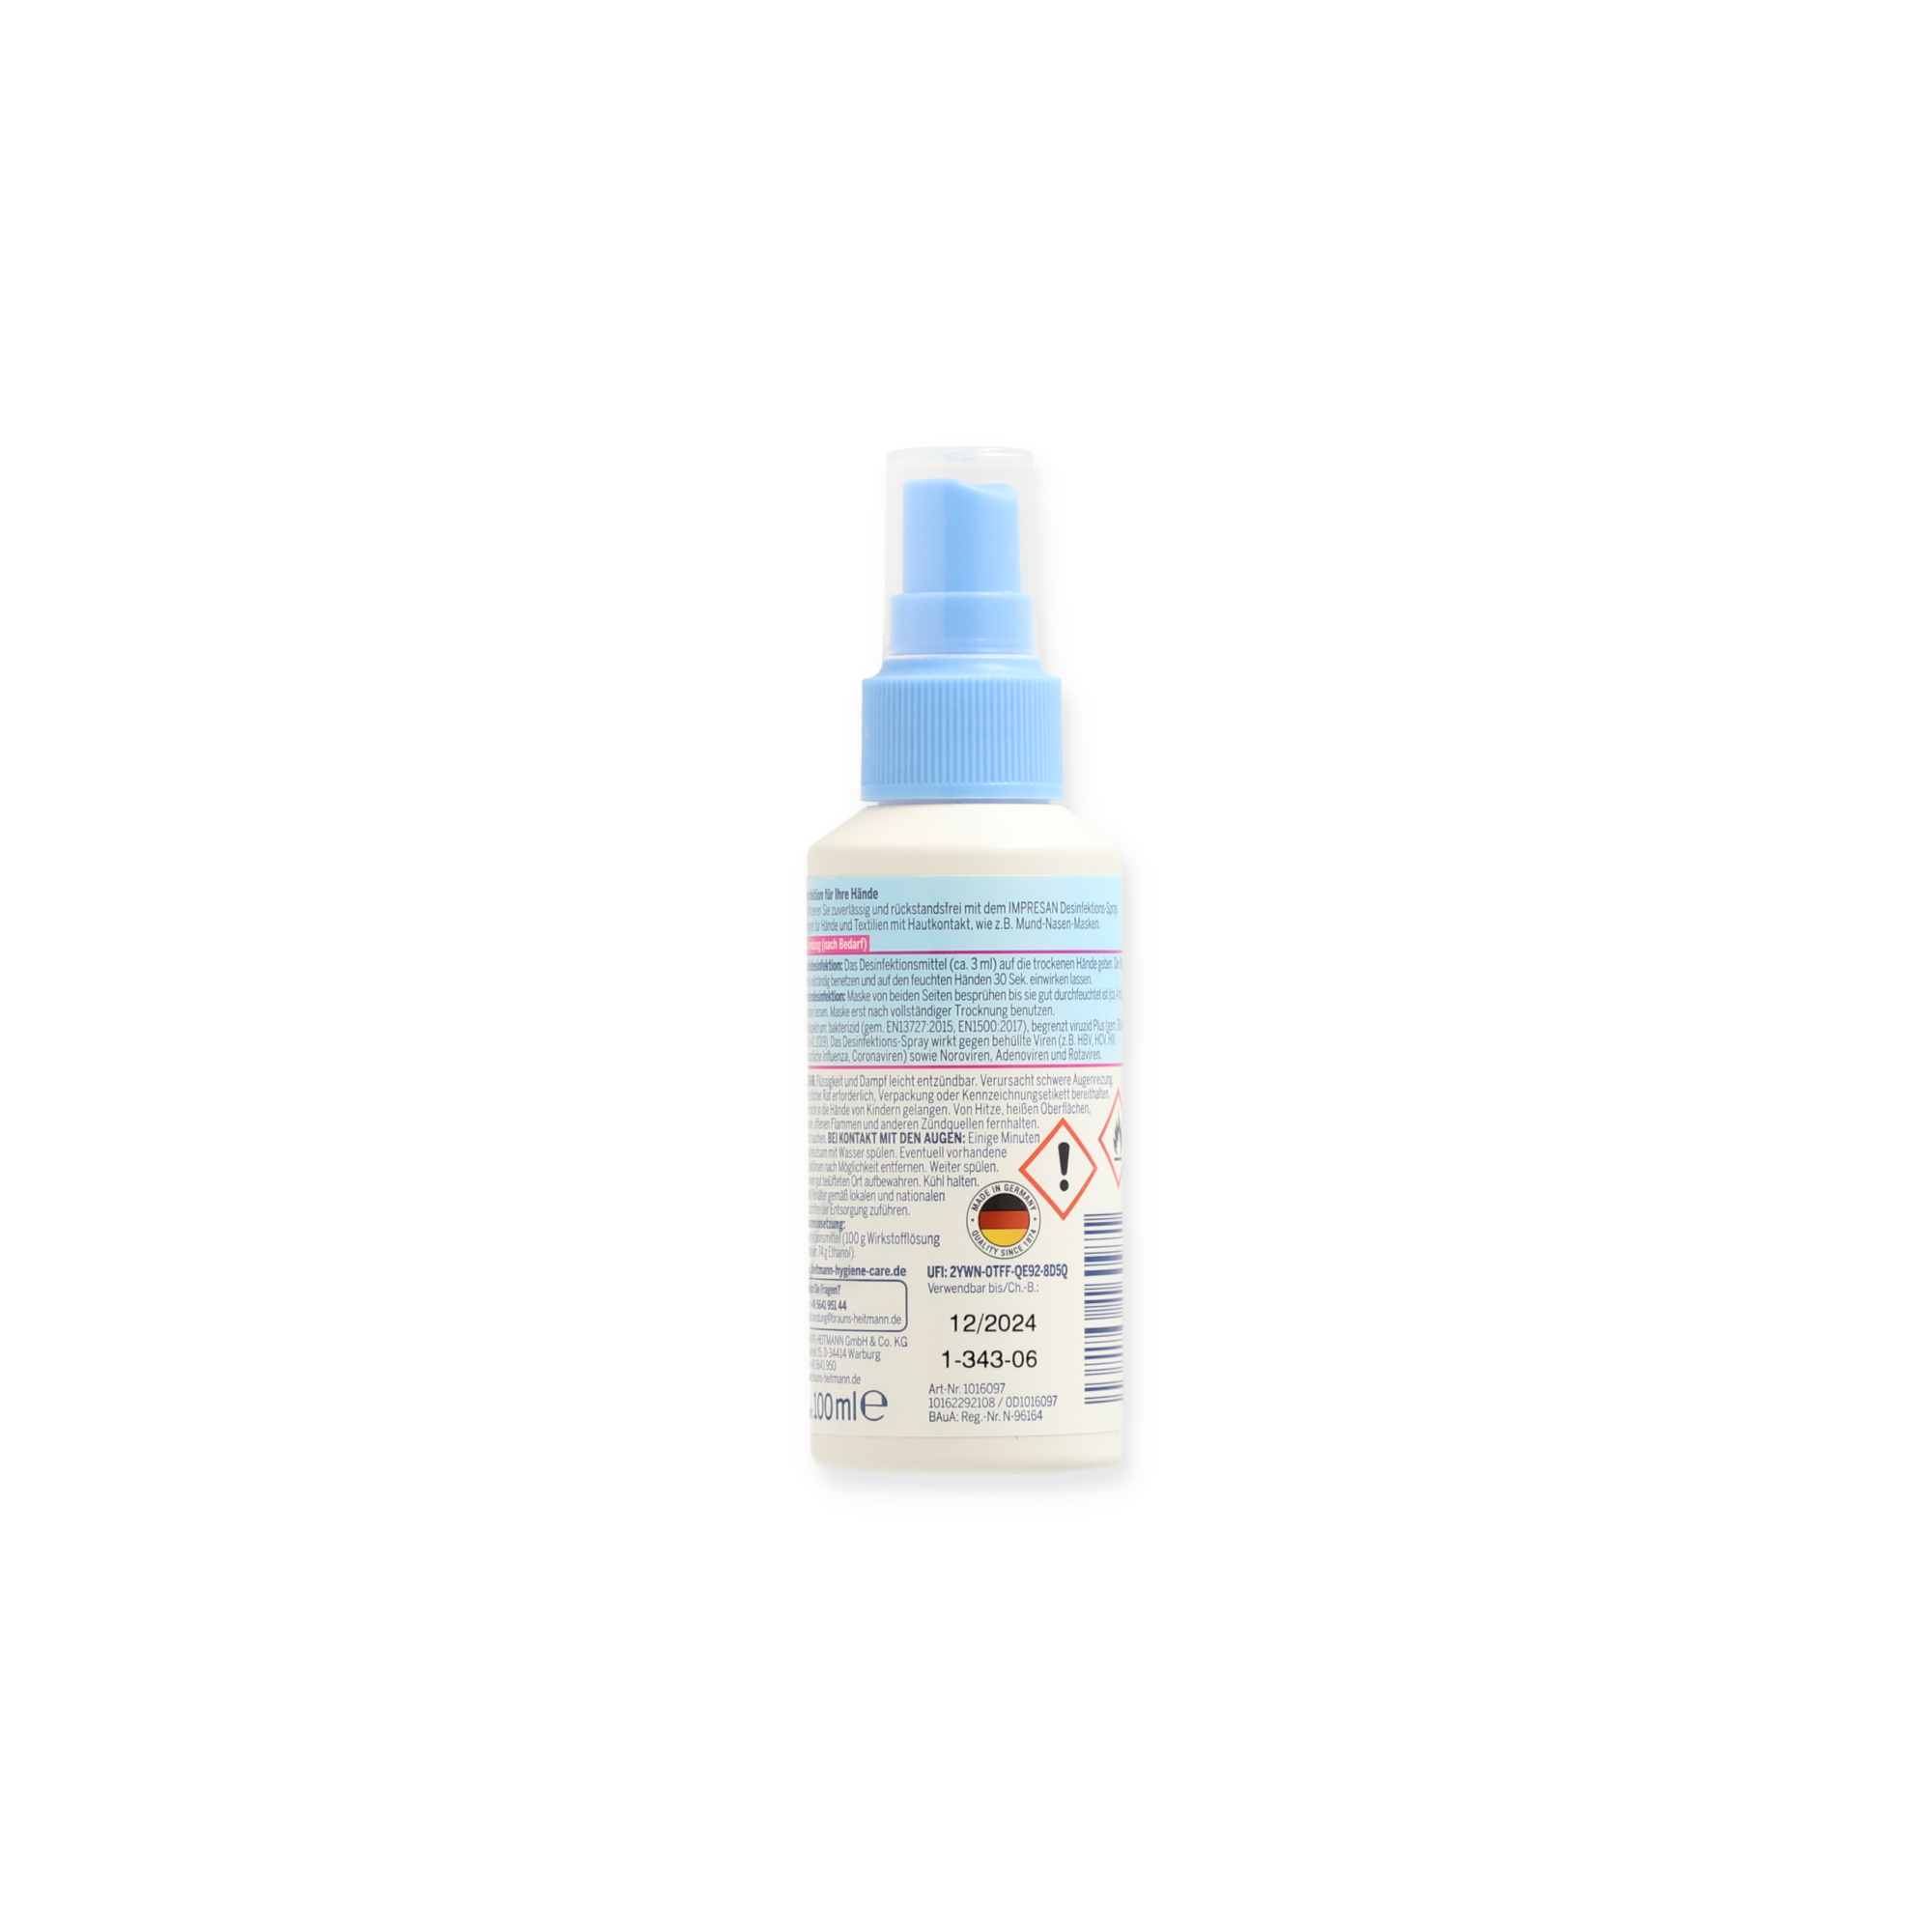 Desinfektions-Hand-Spray 100 ml + product picture